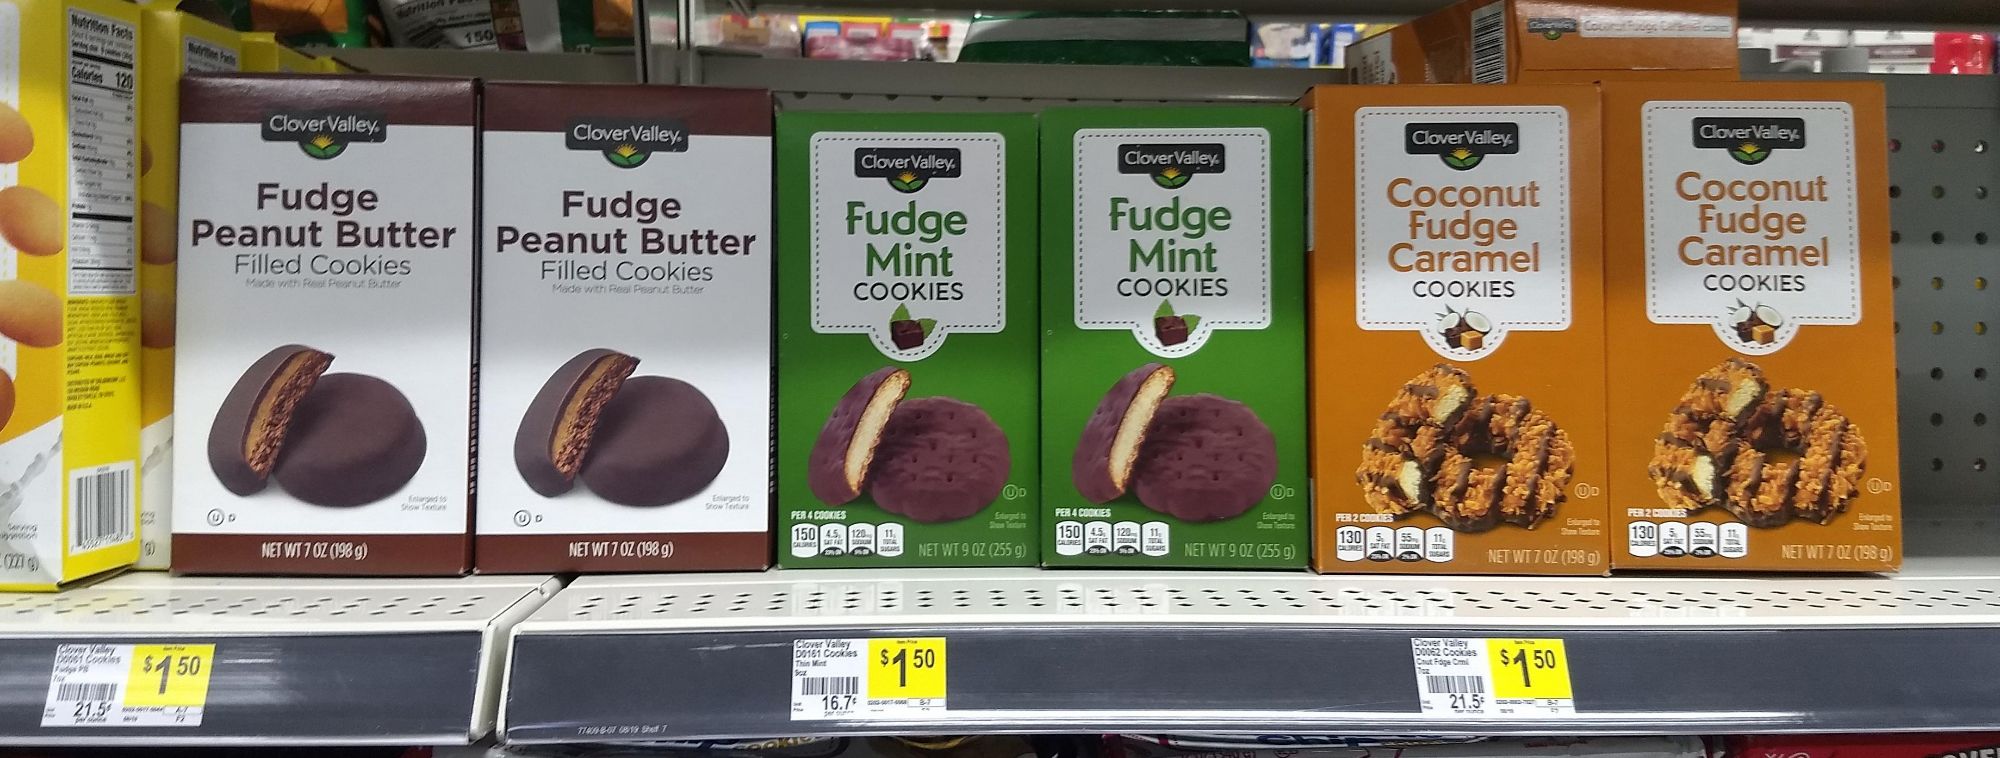 Dollar General Clover Valley Girl Scout Cookies